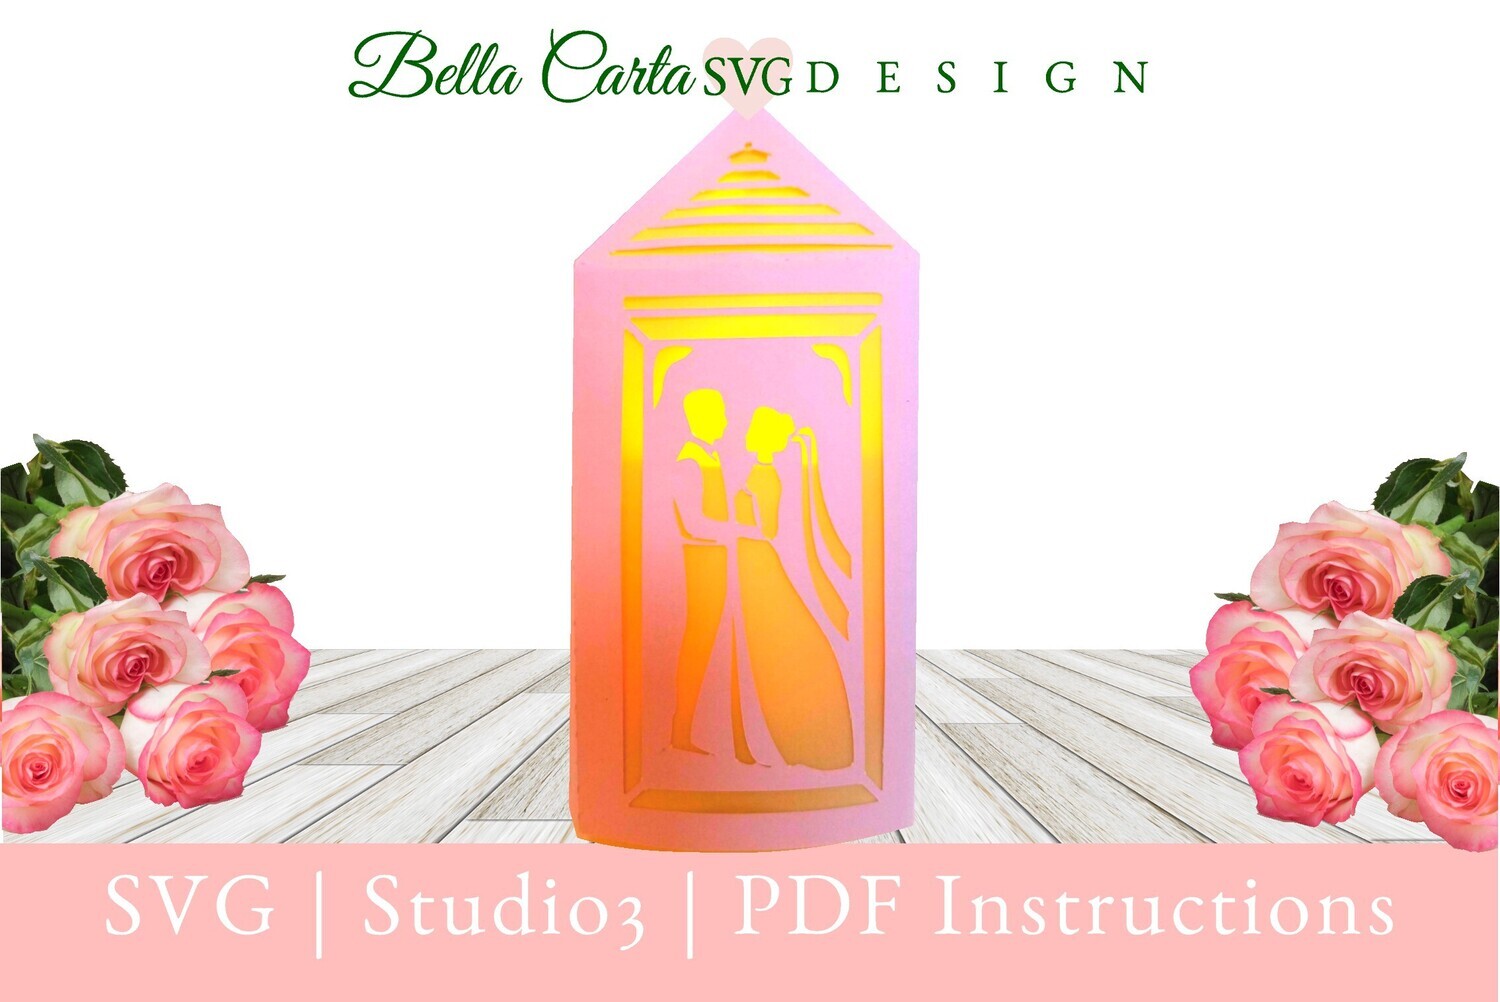 Create a unique wedding themed Lantern using this 3D SVG template and a Cricut, Silhouette or other cutting machine. This beautiful hand-made paper lantern features a Bride and Groom cutout and fits over a standard US LED pillar candle.